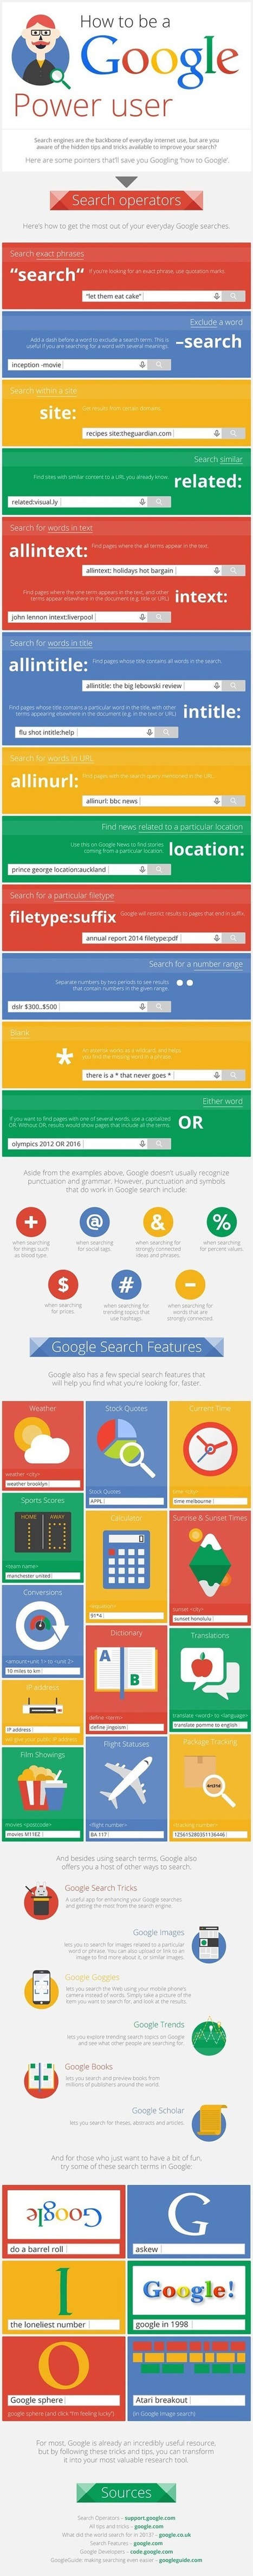 46 Hidden Tips and Tricks to Use Google Search Like a Boss: Infographic | iEduc@rt | Scoop.it